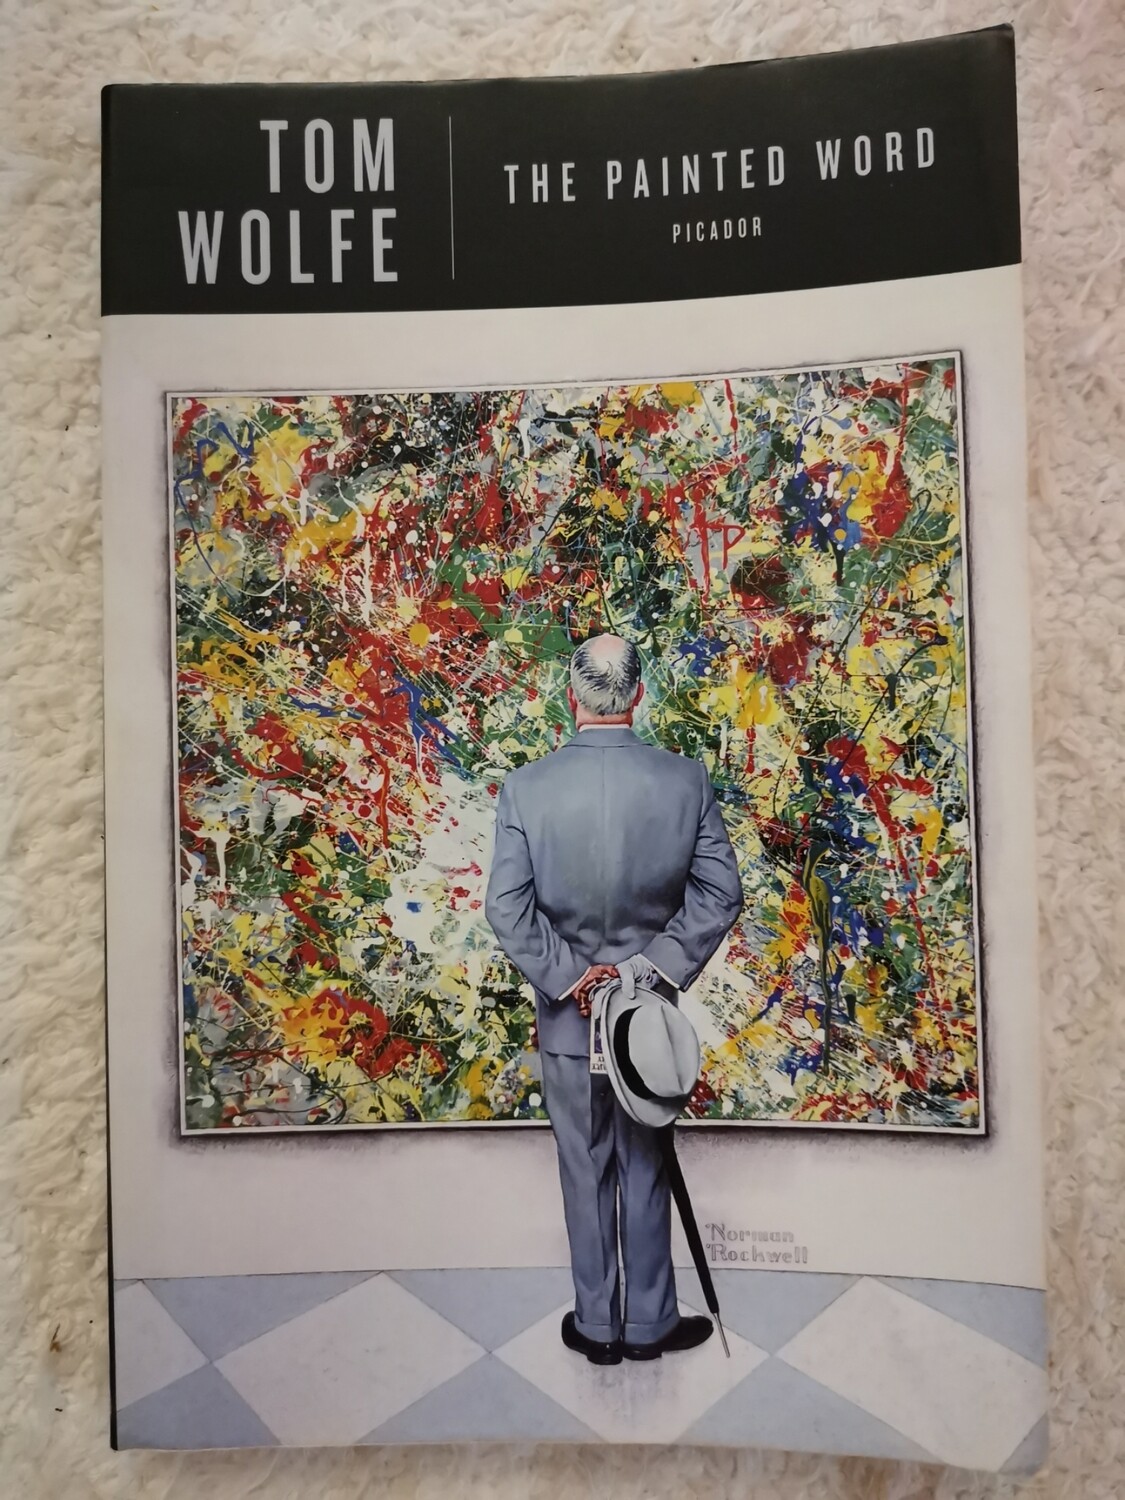 The painted word, Tom Wolfe